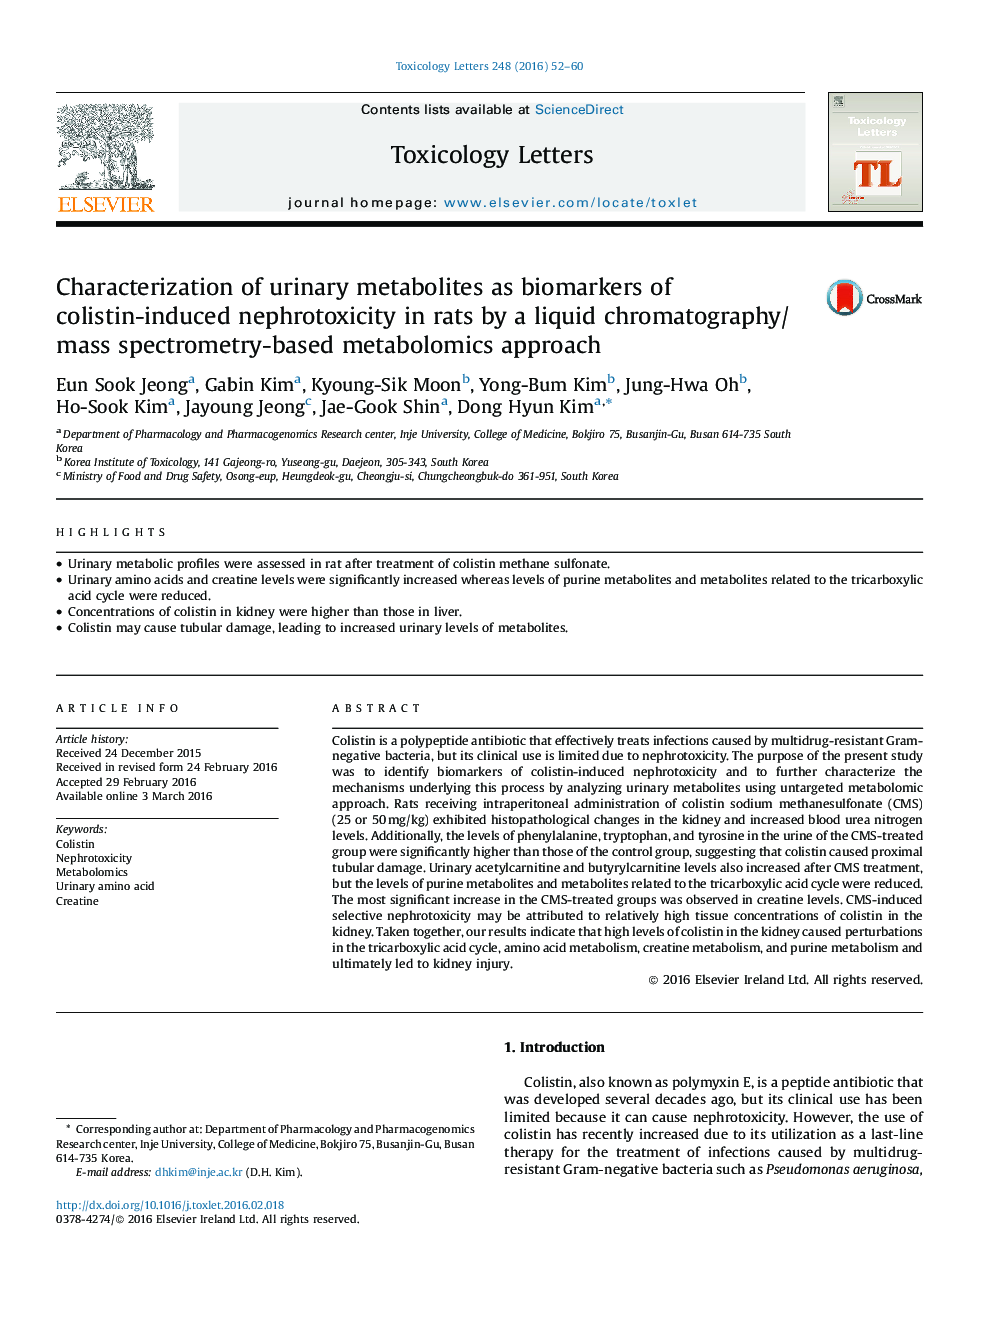 Characterization of urinary metabolites as biomarkers of colistin-induced nephrotoxicity in rats by a liquid chromatography/mass spectrometry-based metabolomics approach